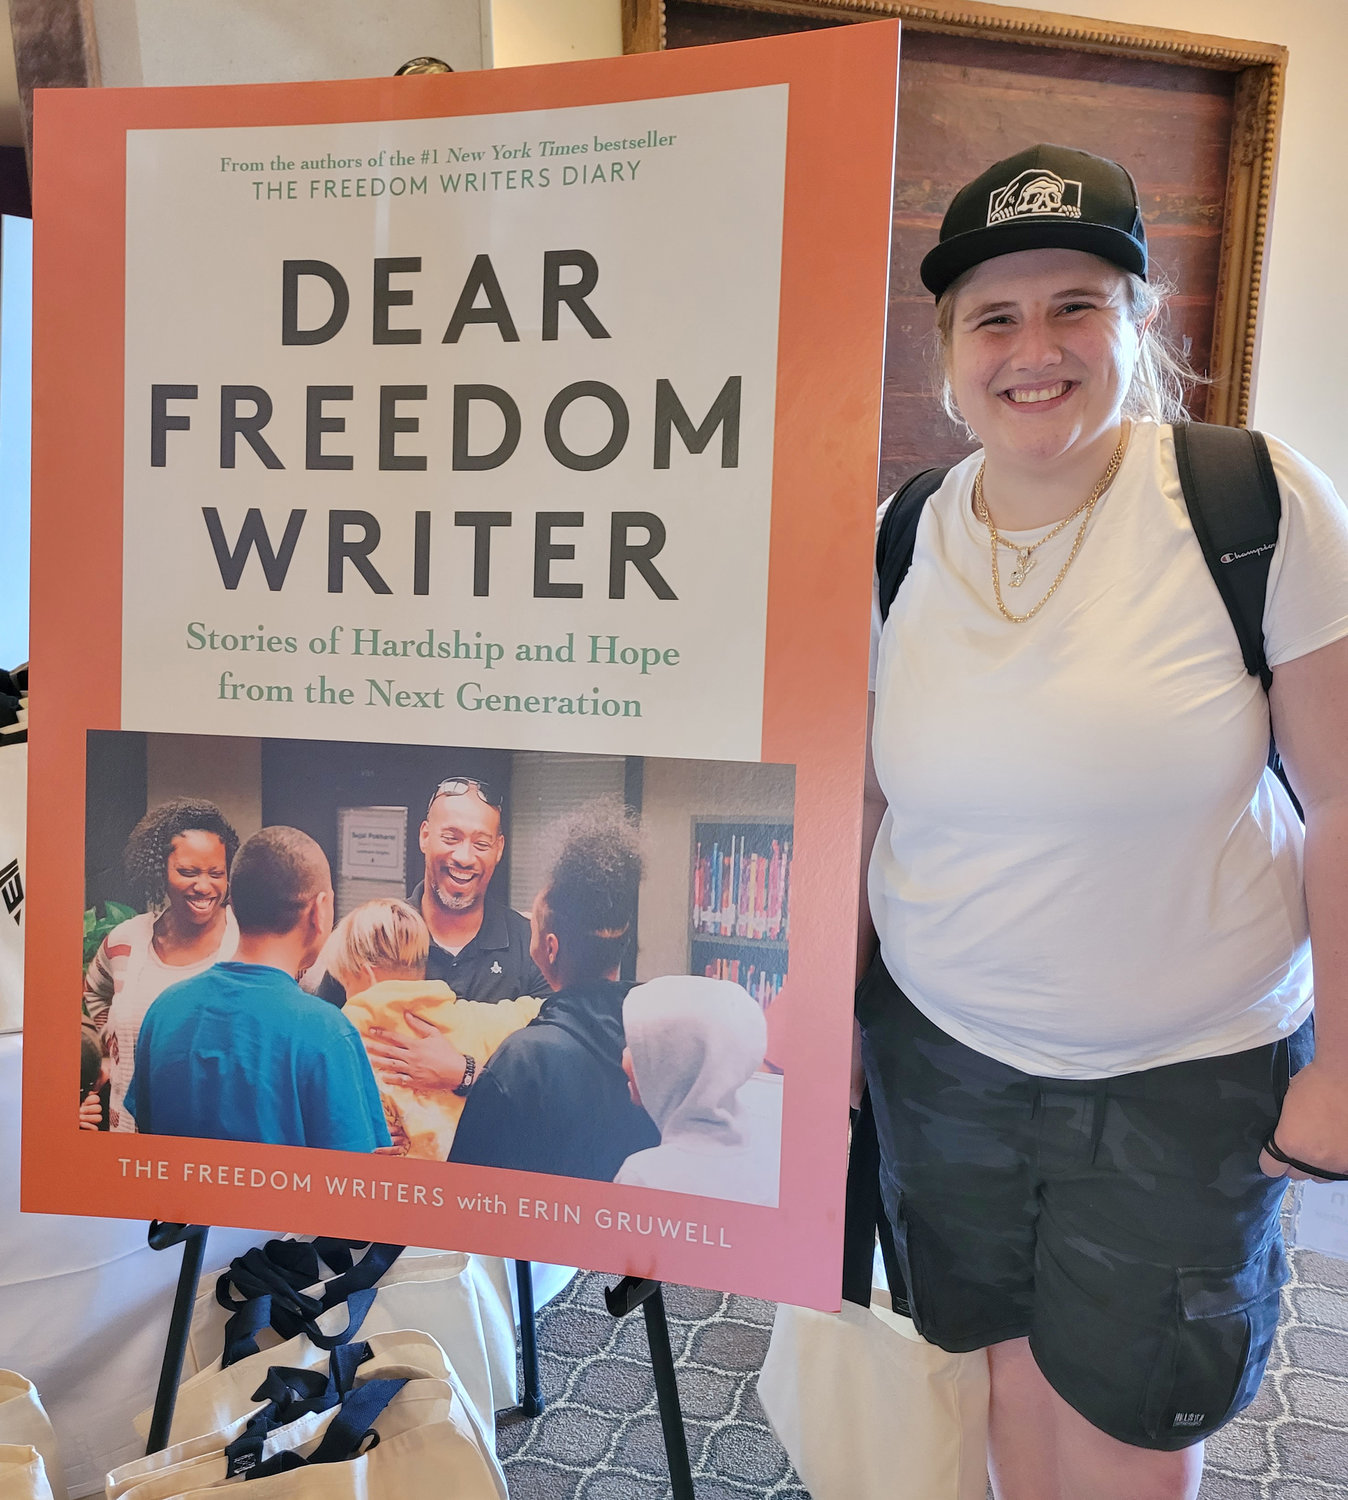 Sauquoit Valley High School junior Jadyn Land was chosen to share her story about bullying and thoughts of self-harm in the new book, “Dear Freedom Writer: Stories of Hardship and Hope from the Next Generation,” published by The Freedom Writers Foundation. A special event will be hosted for Land on June 4 at Sauquoit Valley Middle School where she will sign copies of the book.